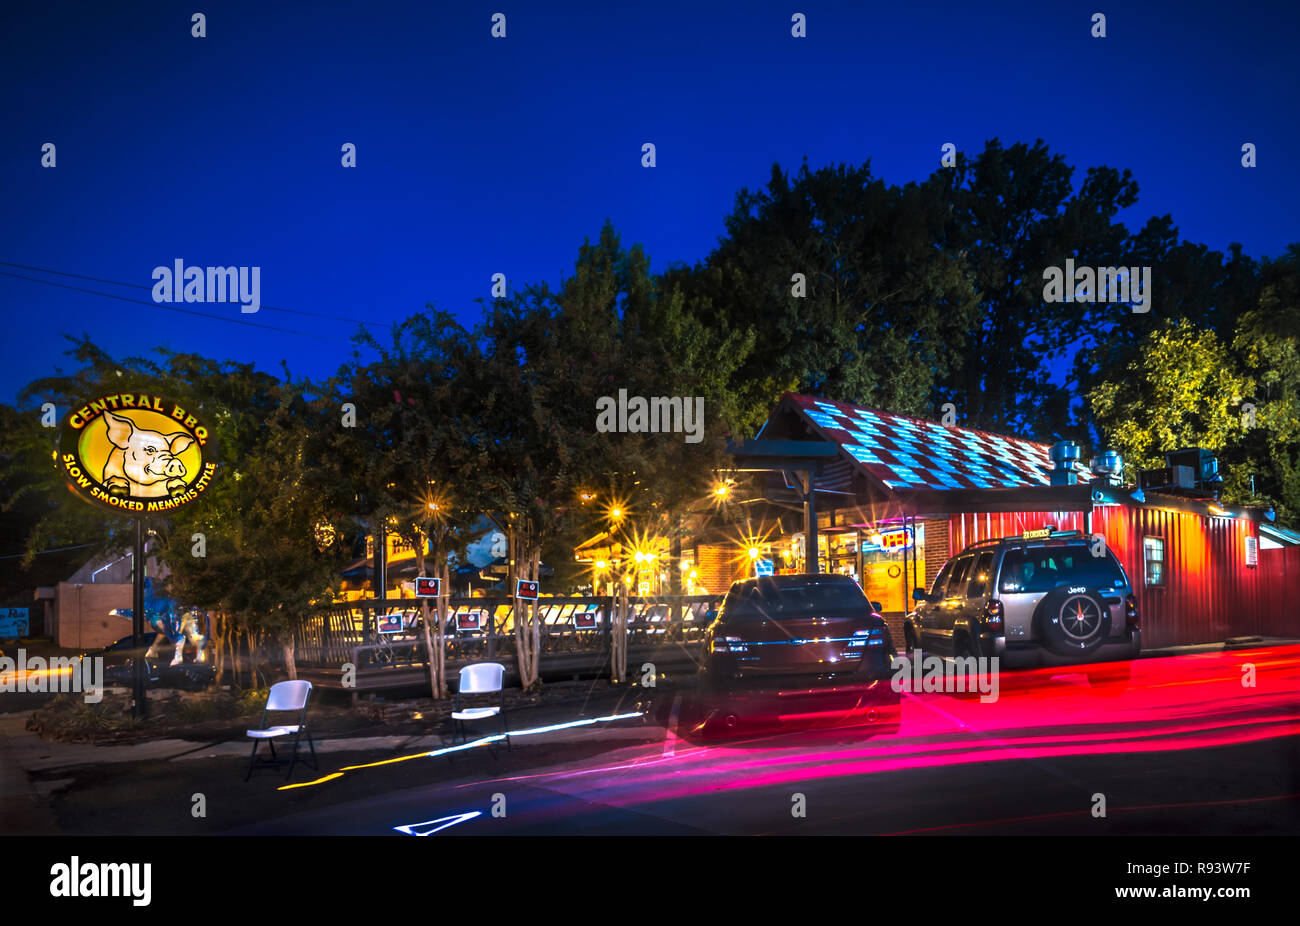 Central BBQ is illuminated at night, Sept. 14, 2015, on Central Avenue in Memphis, Tennessee. The restaurant was founded in 2002. Stock Photo